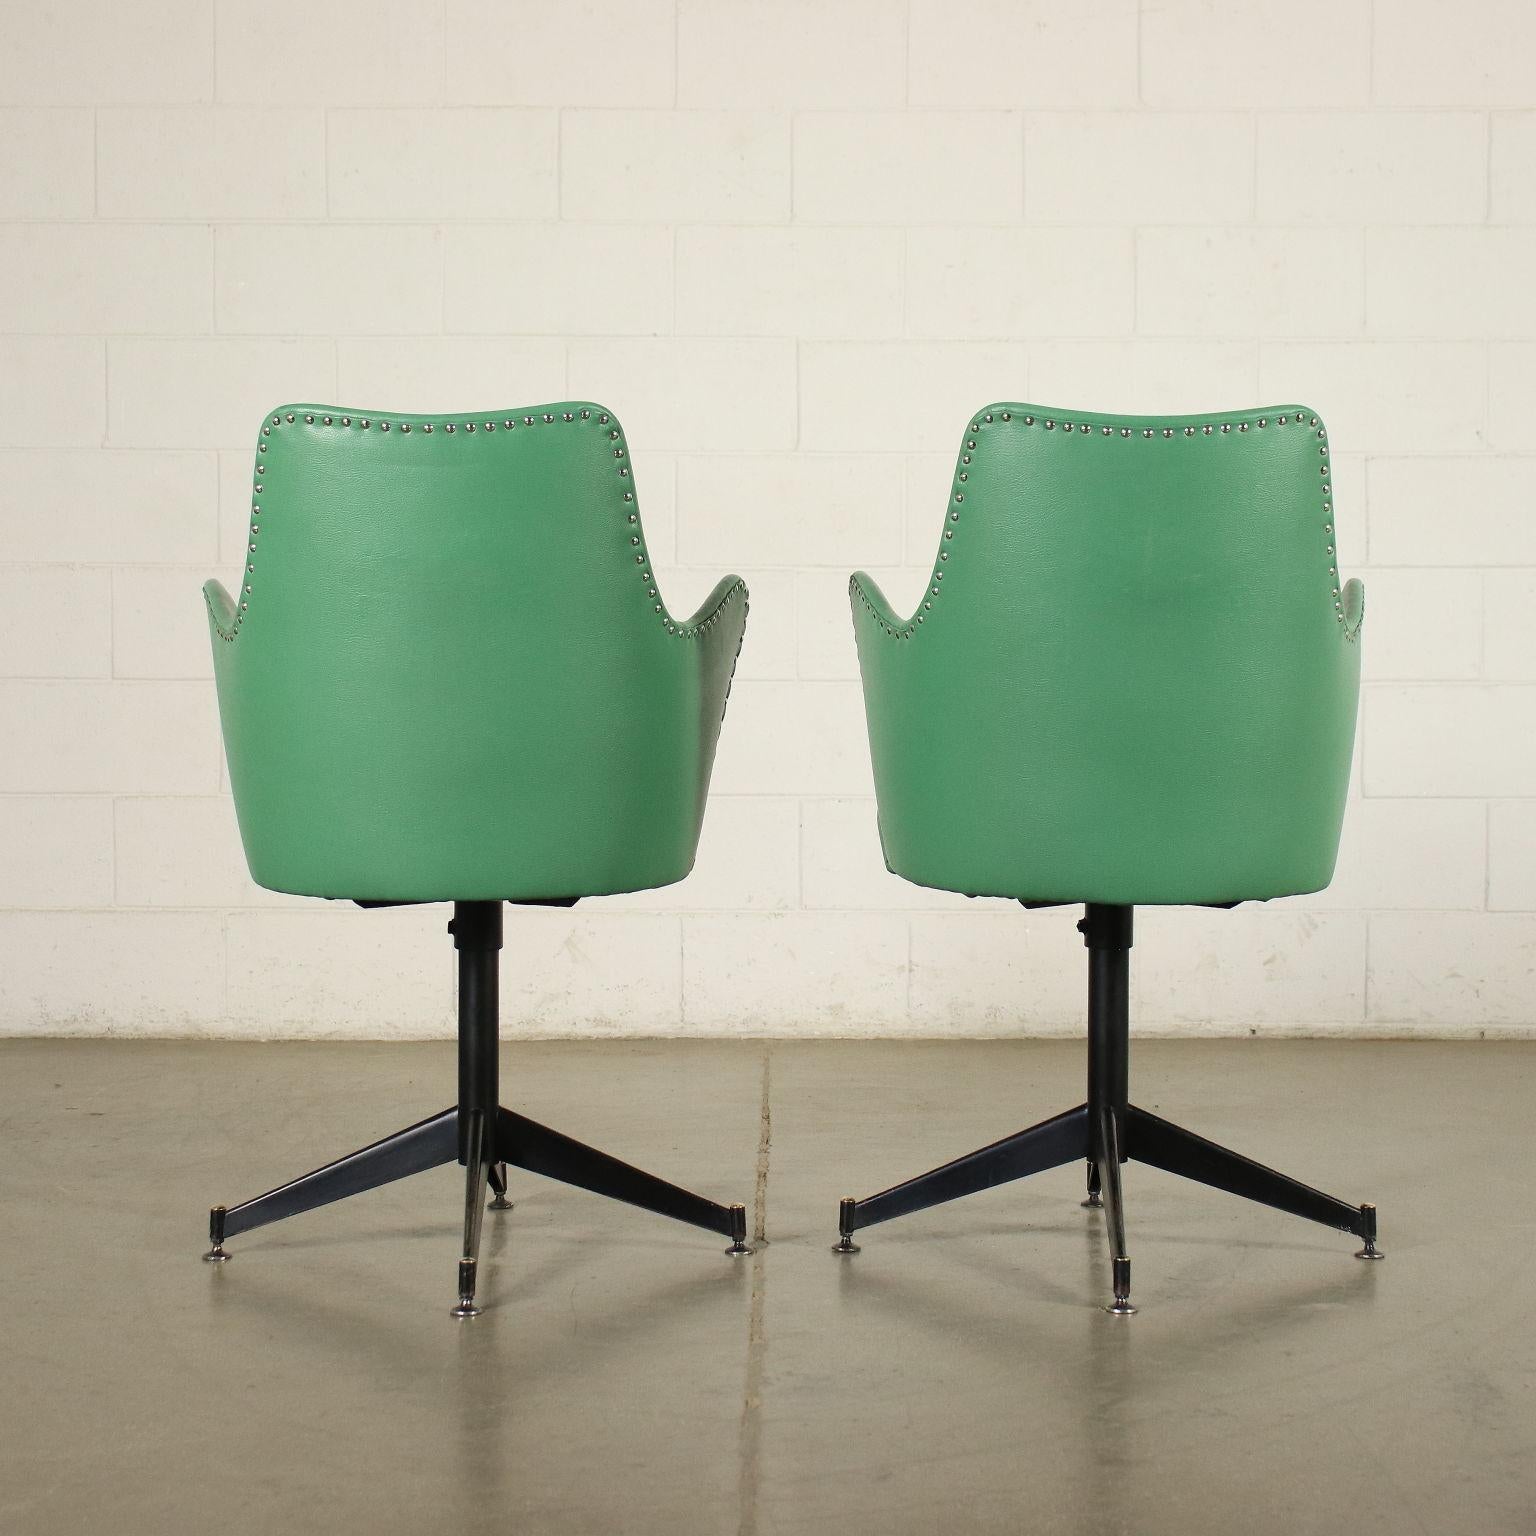 Pair of Chairs Foam Metal Leatherette Italy 1950s 1960s For Sale 5